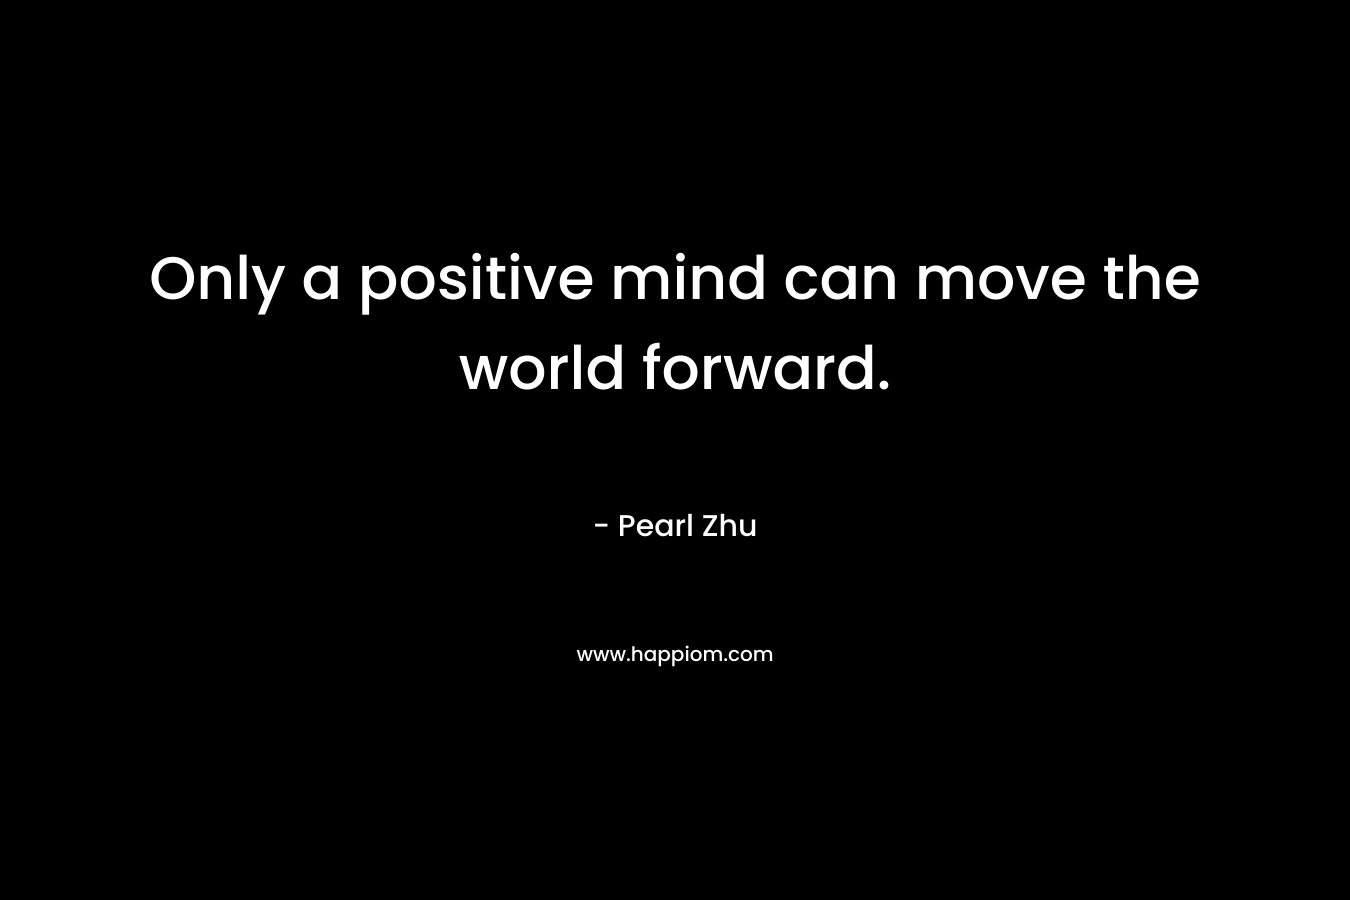 Only a positive mind can move the world forward.